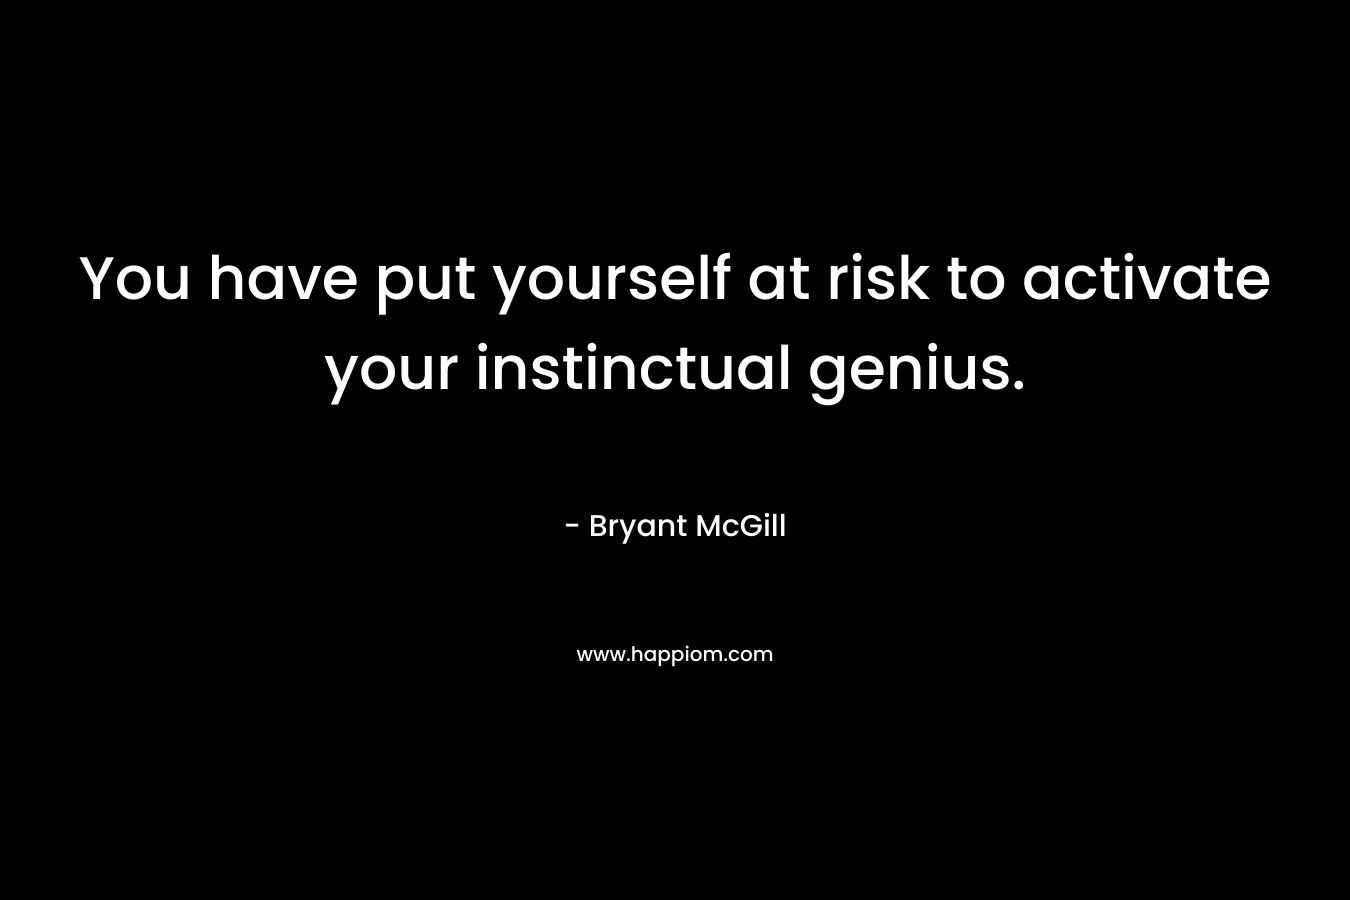 You have put yourself at risk to activate your instinctual genius. – Bryant McGill